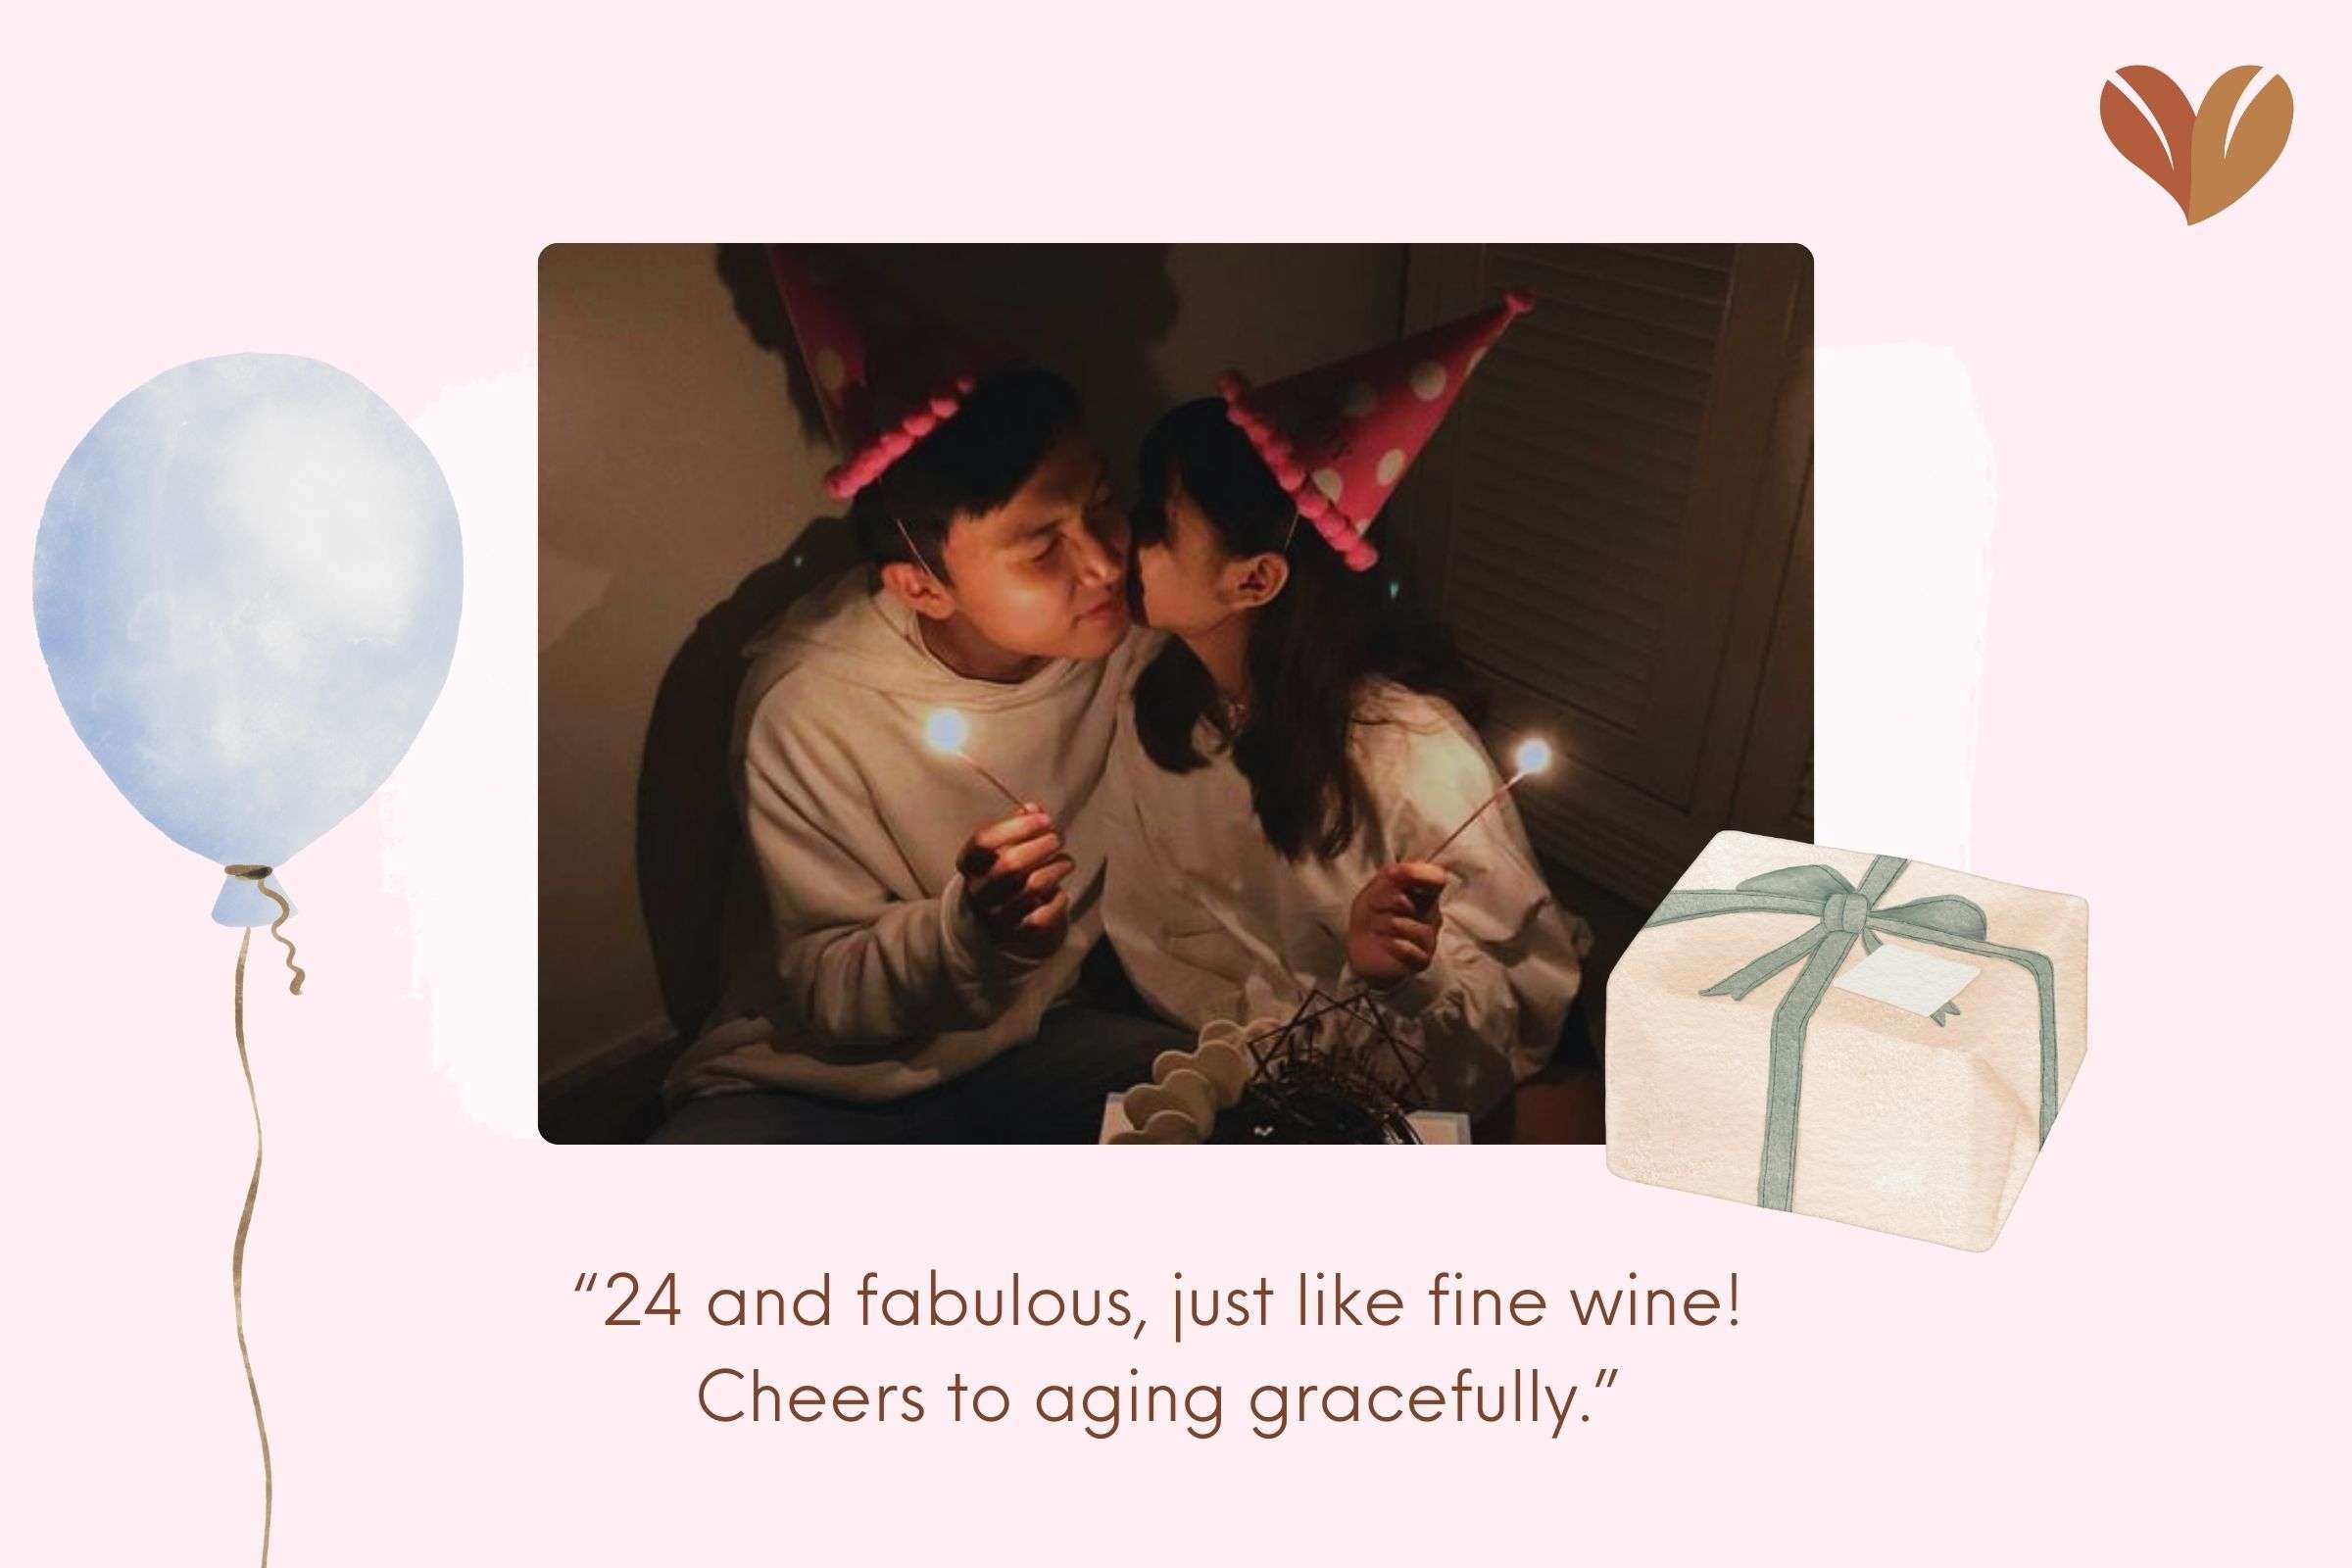 “24 and fabulous, just like fine wine! Cheers to aging gracefully.”